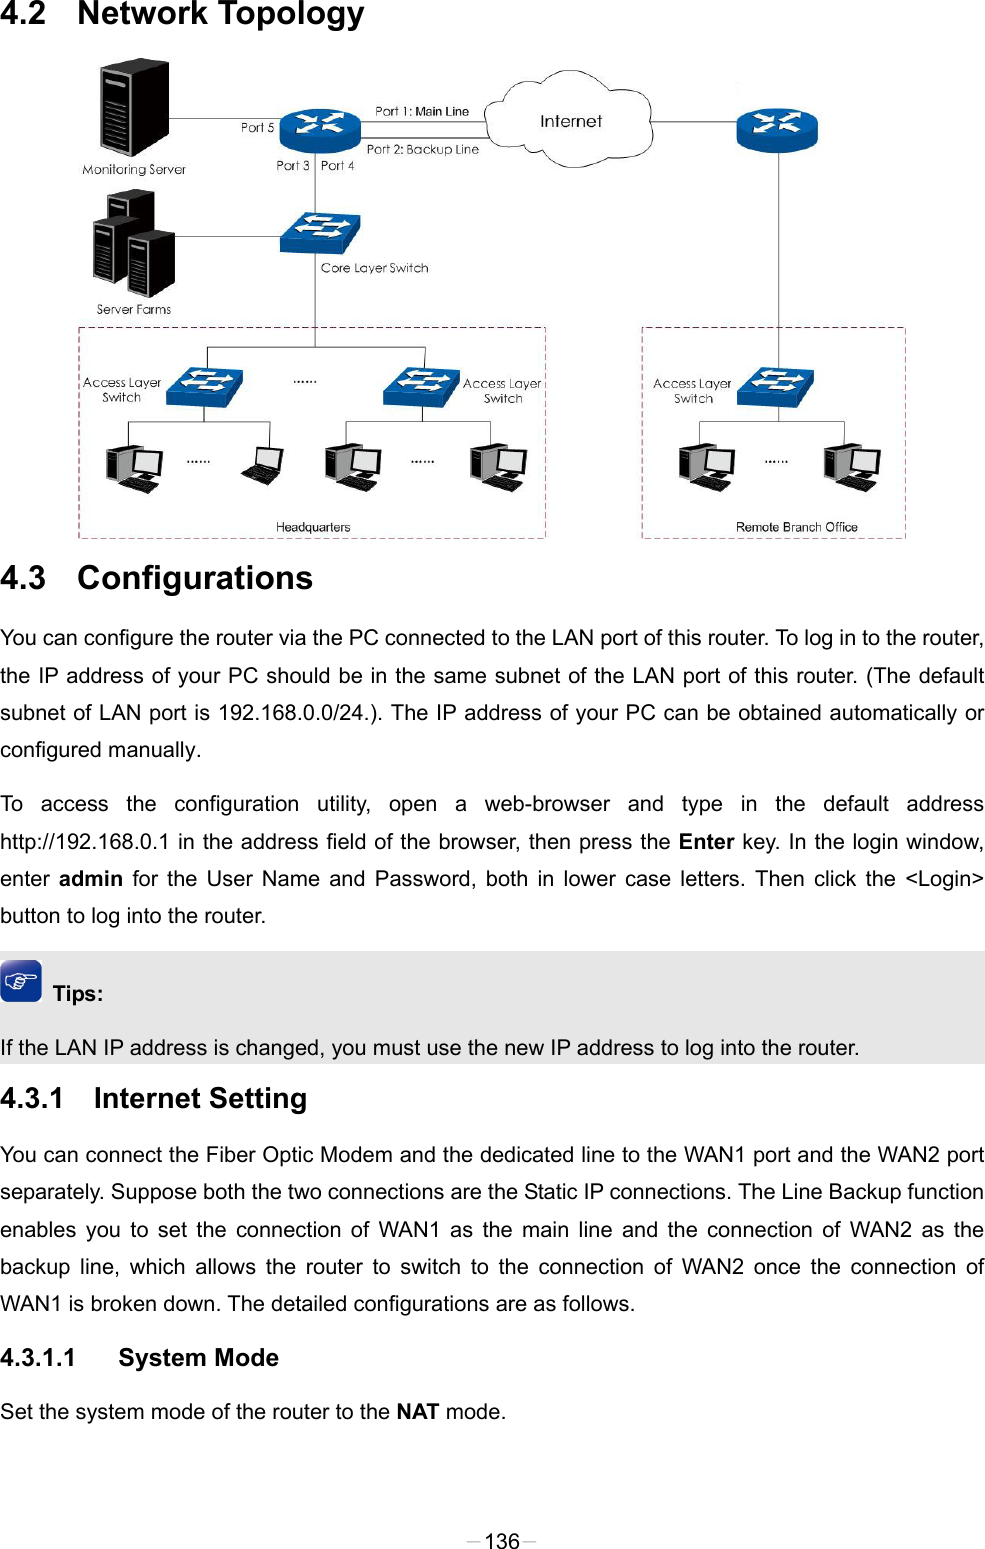  4.2 Network Topology  4.3  Configurations You can configure the router via the PC connected to the LAN port of this router. To log in to the router, the IP address of your PC should be in the same subnet of the LAN port of this router. (The default subnet of LAN port is 192.168.0.0/24.). The IP address of your PC can be obtained automatically or configured manually.   To access the configuration utility, open a web-browser and type in the default address http://192.168.0.1 in the address field of the browser, then press the Enter key. In the login window, enter  admin for the User Name and Password, both in lower case letters. Then click the &lt;Login&gt; button to log into the router.  Tips: If the LAN IP address is changed, you must use the new IP address to log into the router. 4.3.1 Internet Setting You can connect the Fiber Optic Modem and the dedicated line to the WAN1 port and the WAN2 port separately. Suppose both the two connections are the Static IP connections. The Line Backup function enables you to set the connection of WAN1 as the main line and the connection of WAN2 as the backup line, which allows the router to switch to the connection of WAN2 once the connection of WAN1 is broken down. The detailed configurations are as follows. 4.3.1.1 System Mode Set the system mode of the router to the NAT mode. -136- 